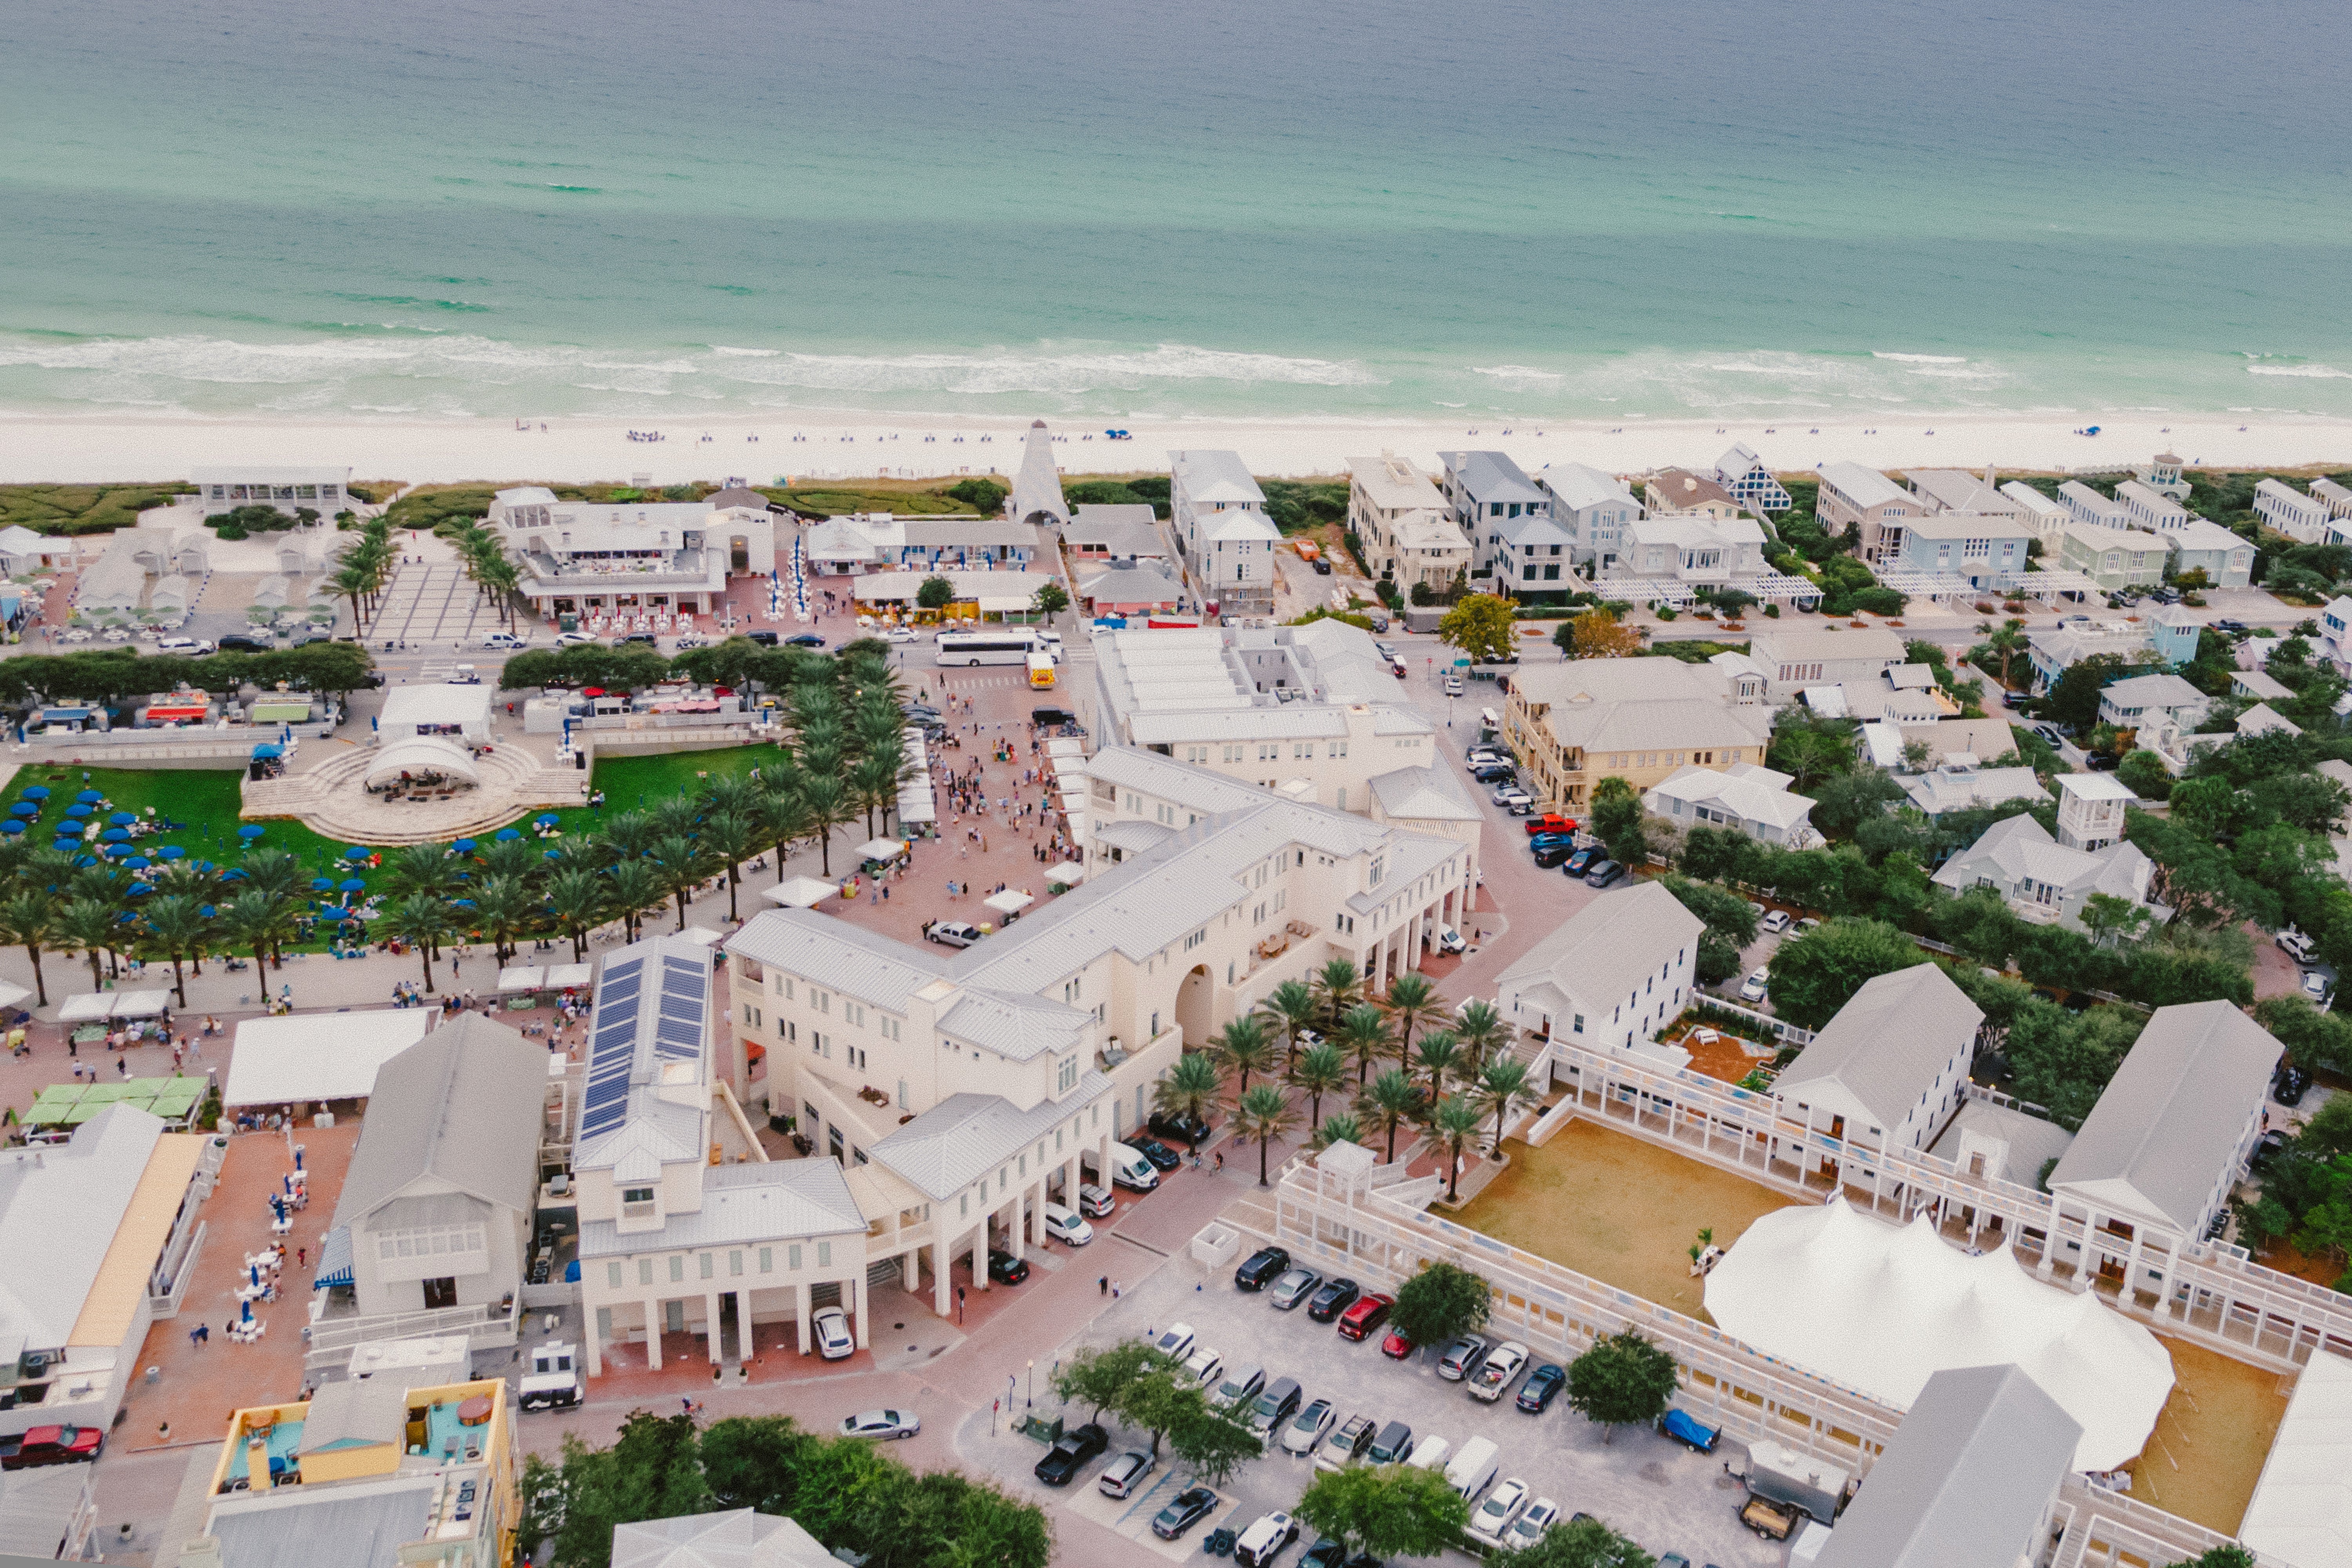 An aerial view of public parking spaces in Seaside, Florida.